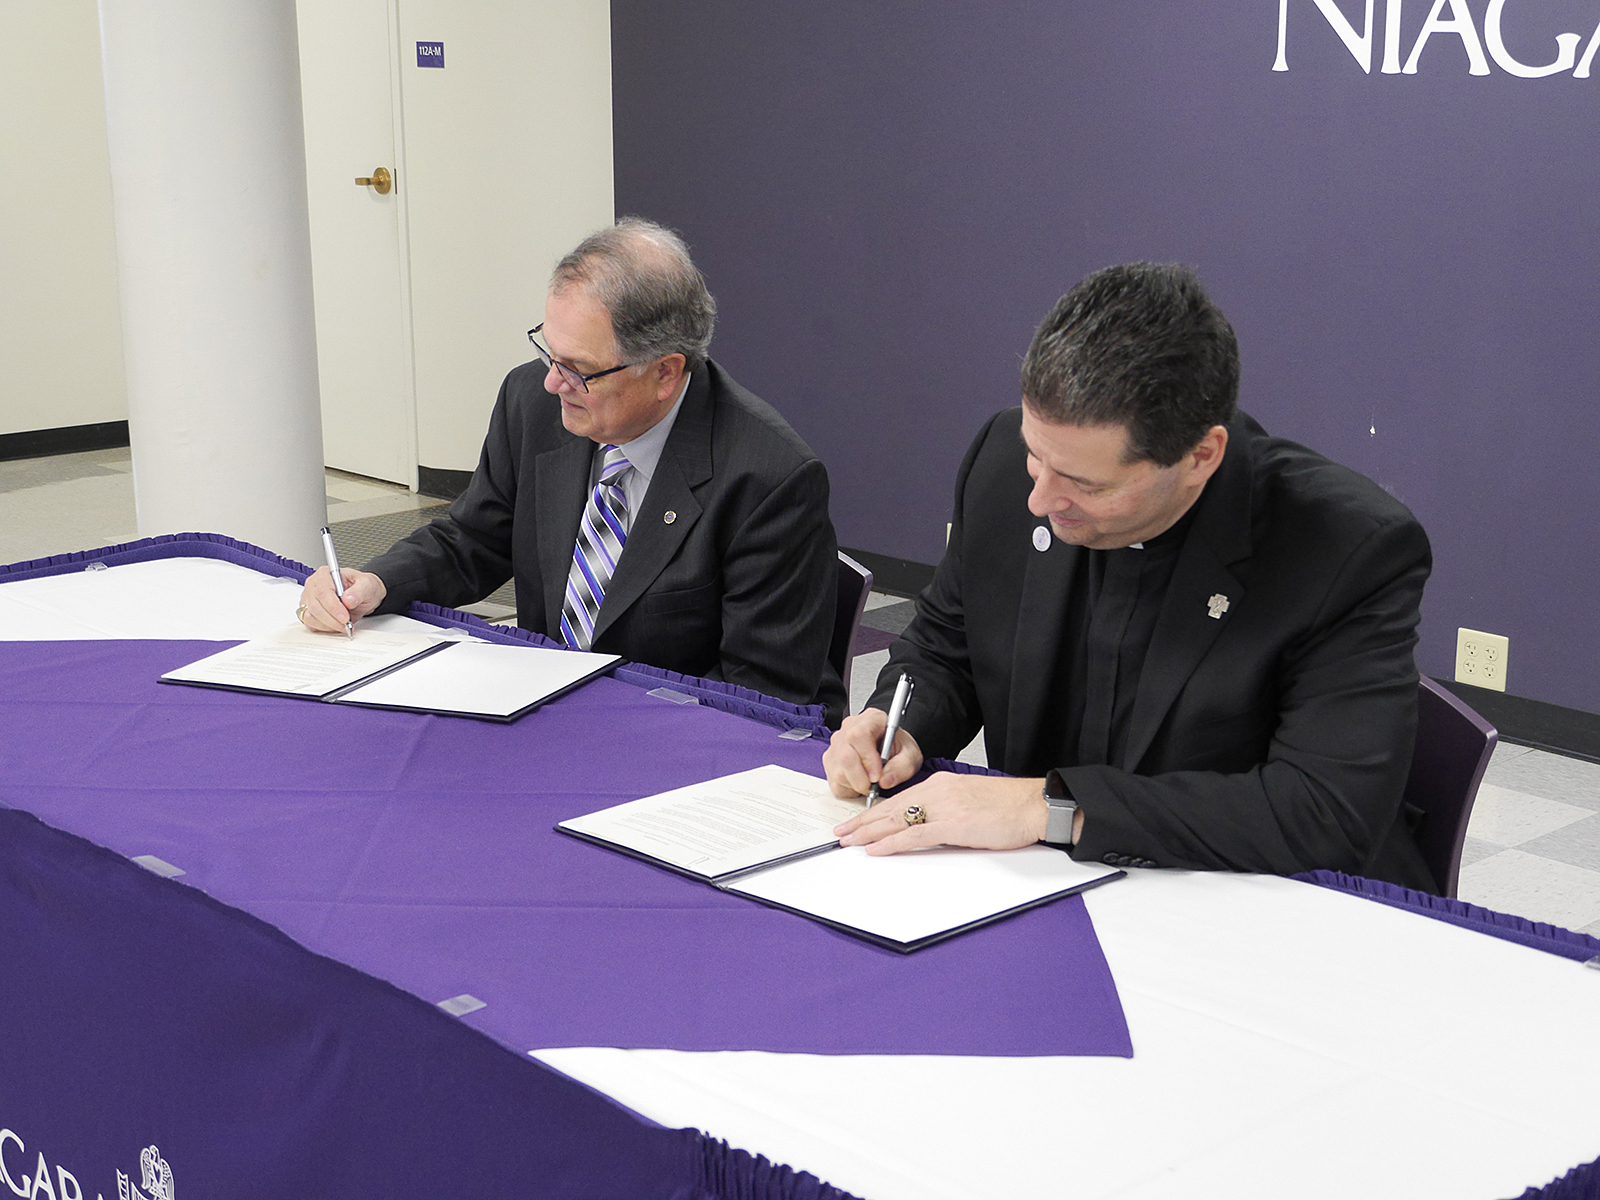 Dr.  William Murabito, president of Niagara County Community College, and the Father James J. Maher, CM, president of Niagara University, sign an agreement to formalize a public/private partnership that will enable the two institutions to provide service, research, and education to support and enhance postsecondary education outcomes and community impact in the Niagara community.
(Courtesy of Niagara University)